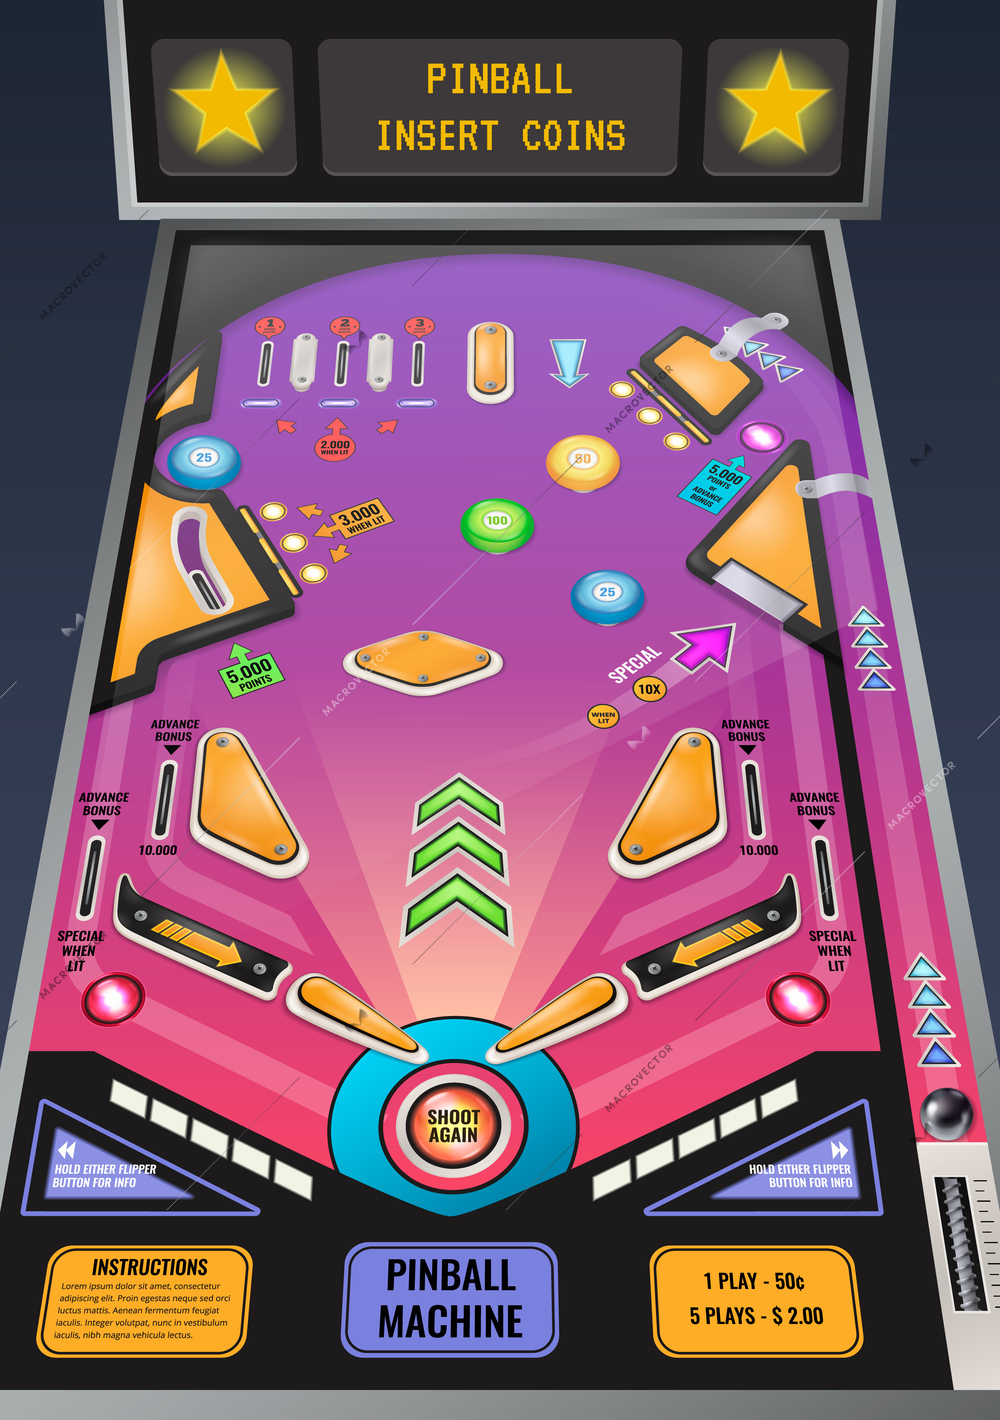 Pinball machine ready to play game realistic composition with flashing lights and insert coins message vector illustration